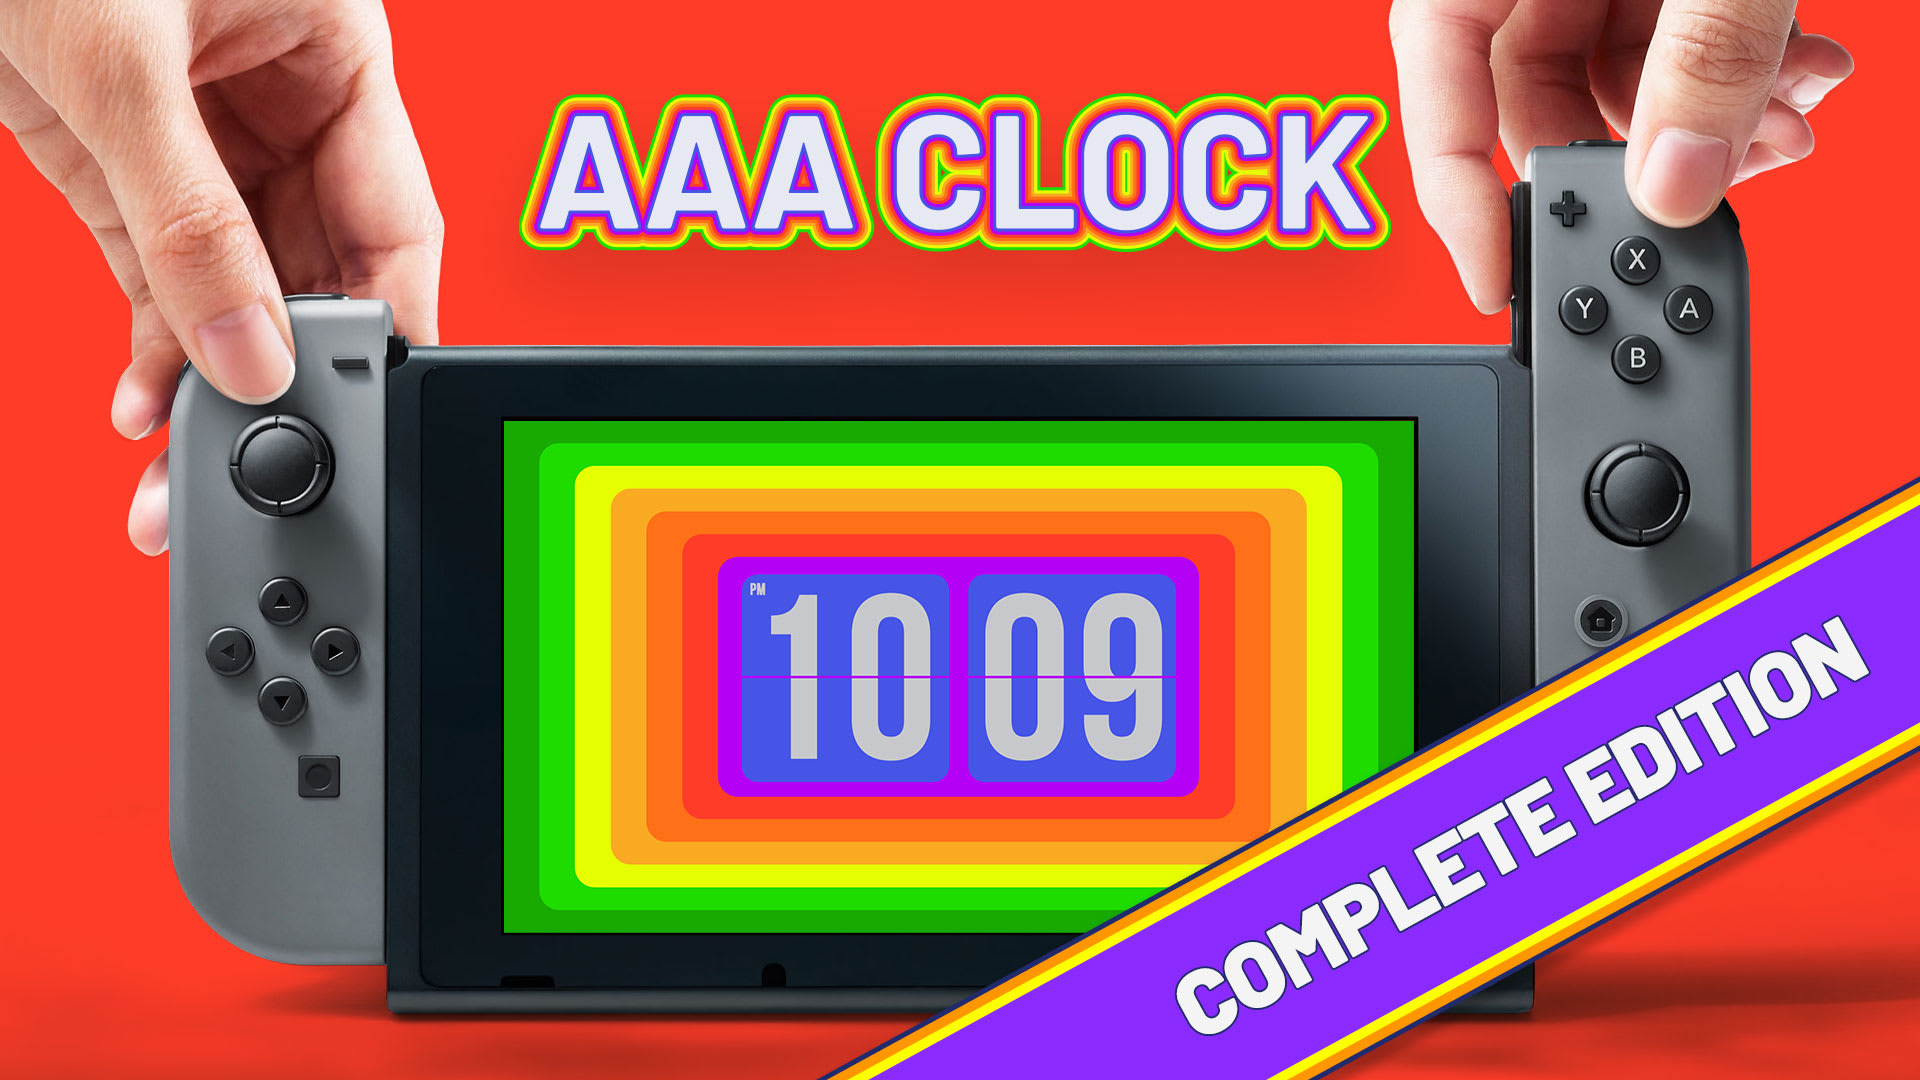 AAA Clock Complete Edition